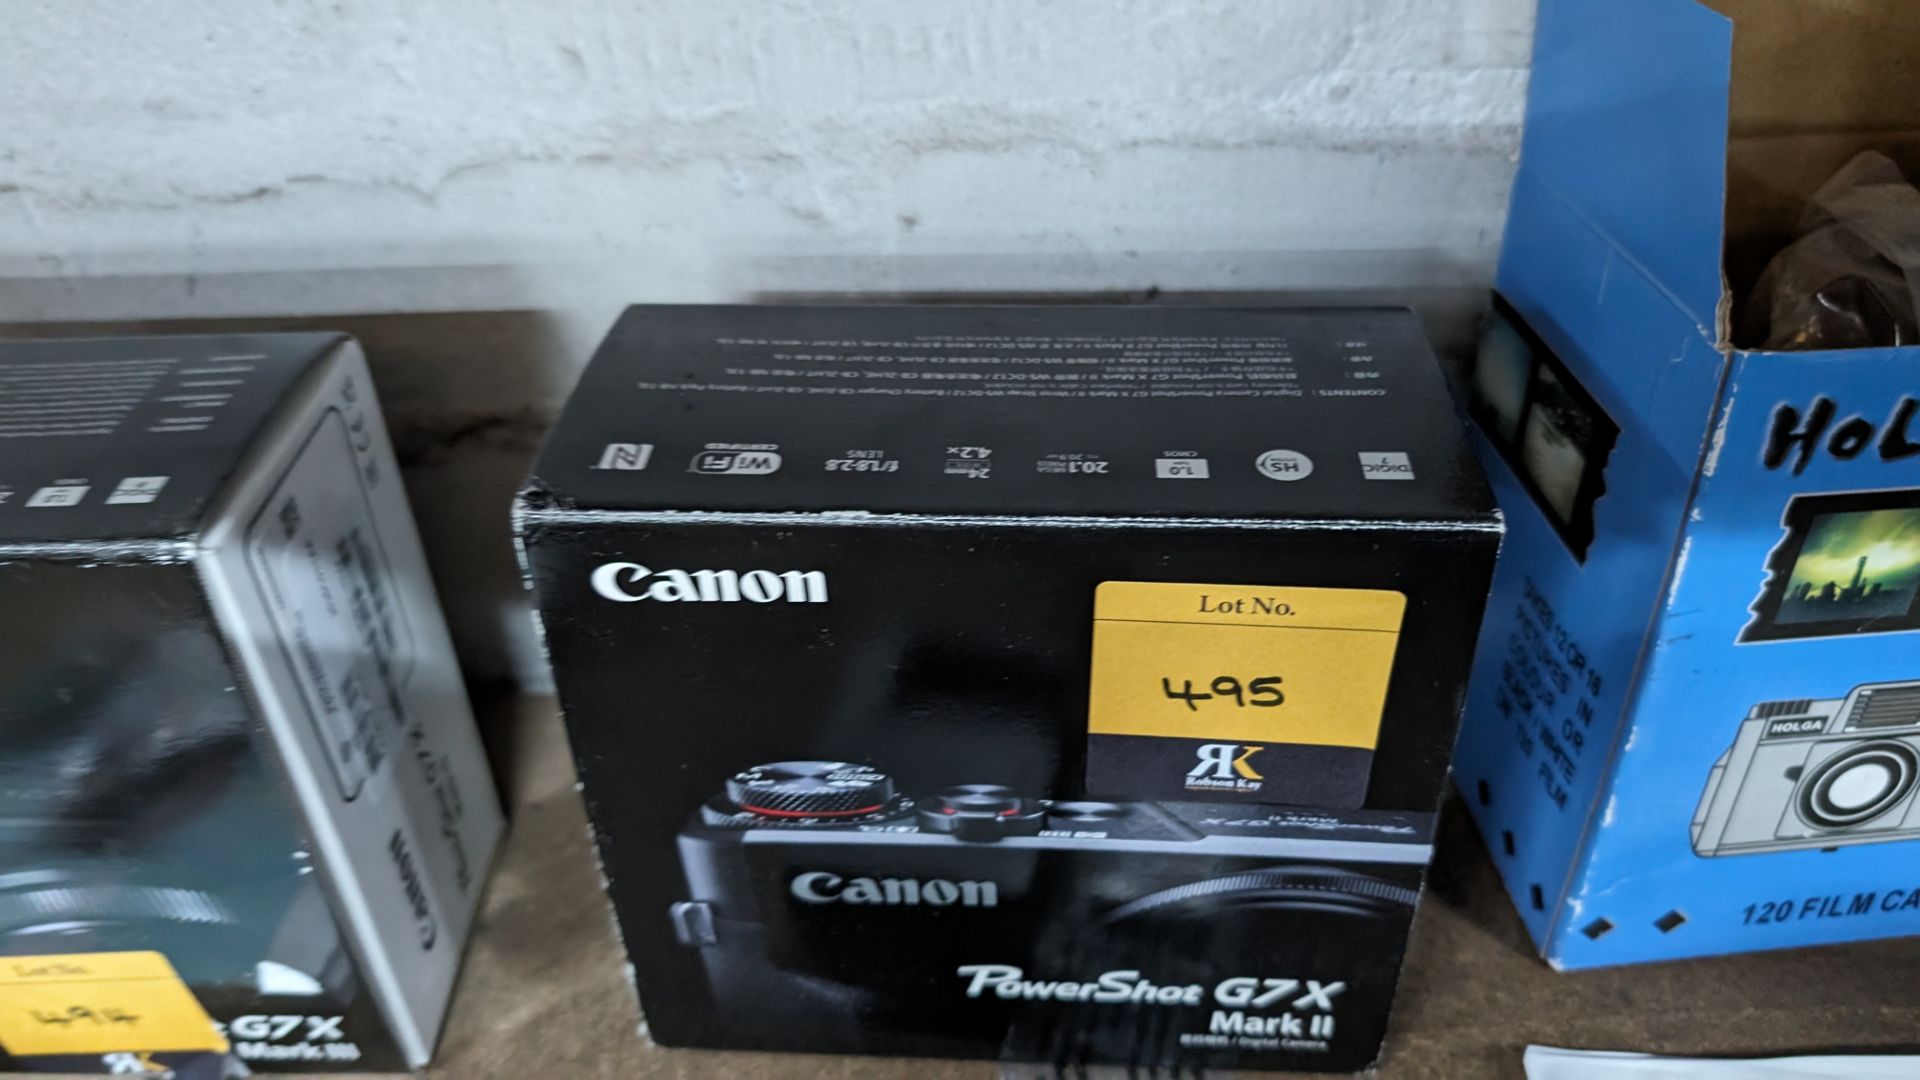 Canon PowerShot G7X Mark II camera, including battery and charger - Image 7 of 12